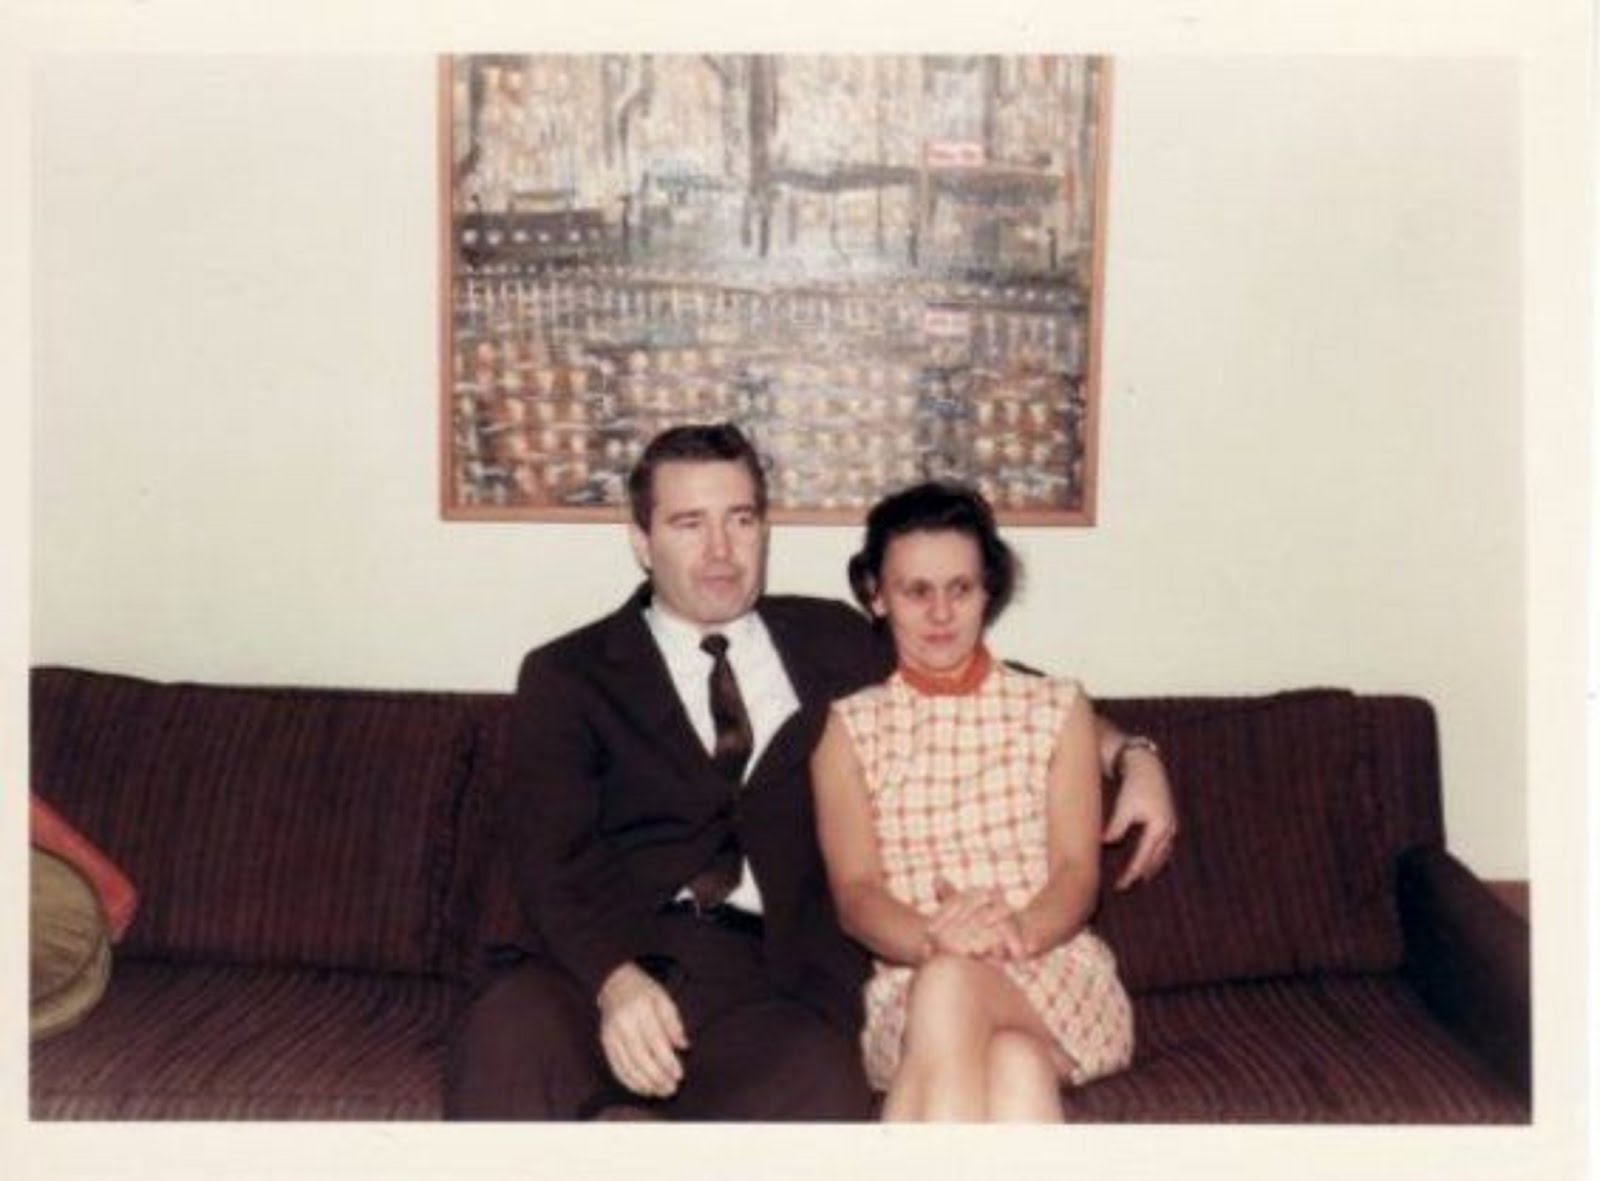 MEET MY FAMILY: MY DAD ZELMAR AND MY MOM IRENE PAYNE.  JAN 19th, 1969 THE NIGHT I LEFT FOR VIETNAM